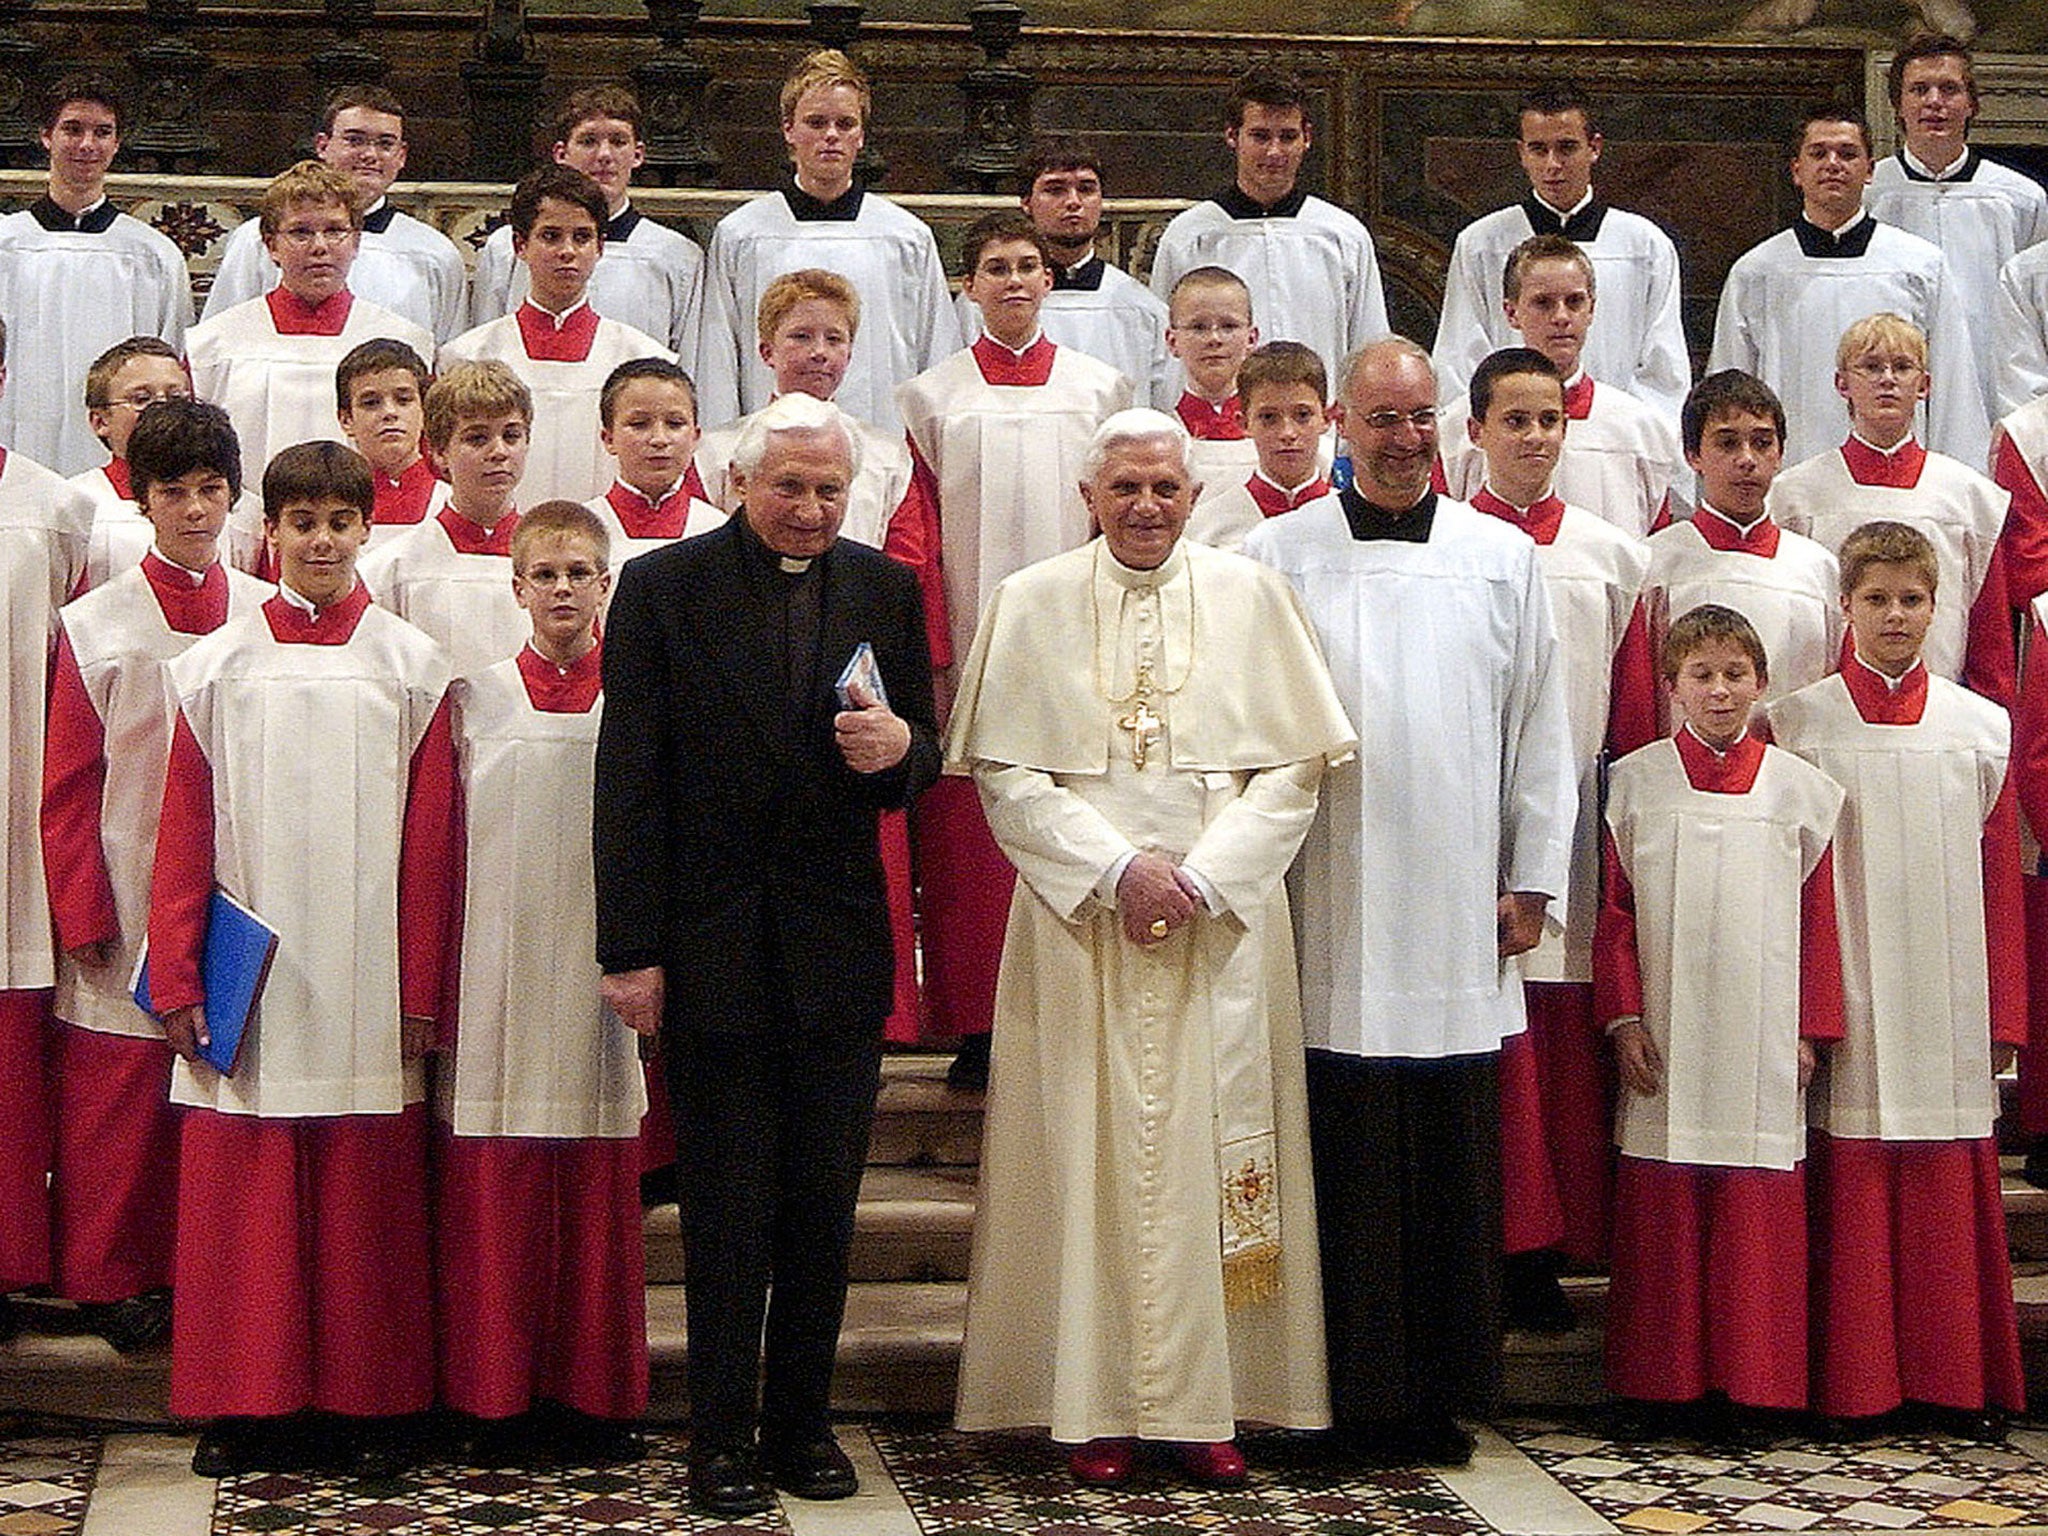 Pope Benedict XVI with his brother Georg Ratzinger and Archbishop Piero Marini (R), after a concert by the Regensburger Domspatzen boys' choir at the Sistine Chapel in 2005